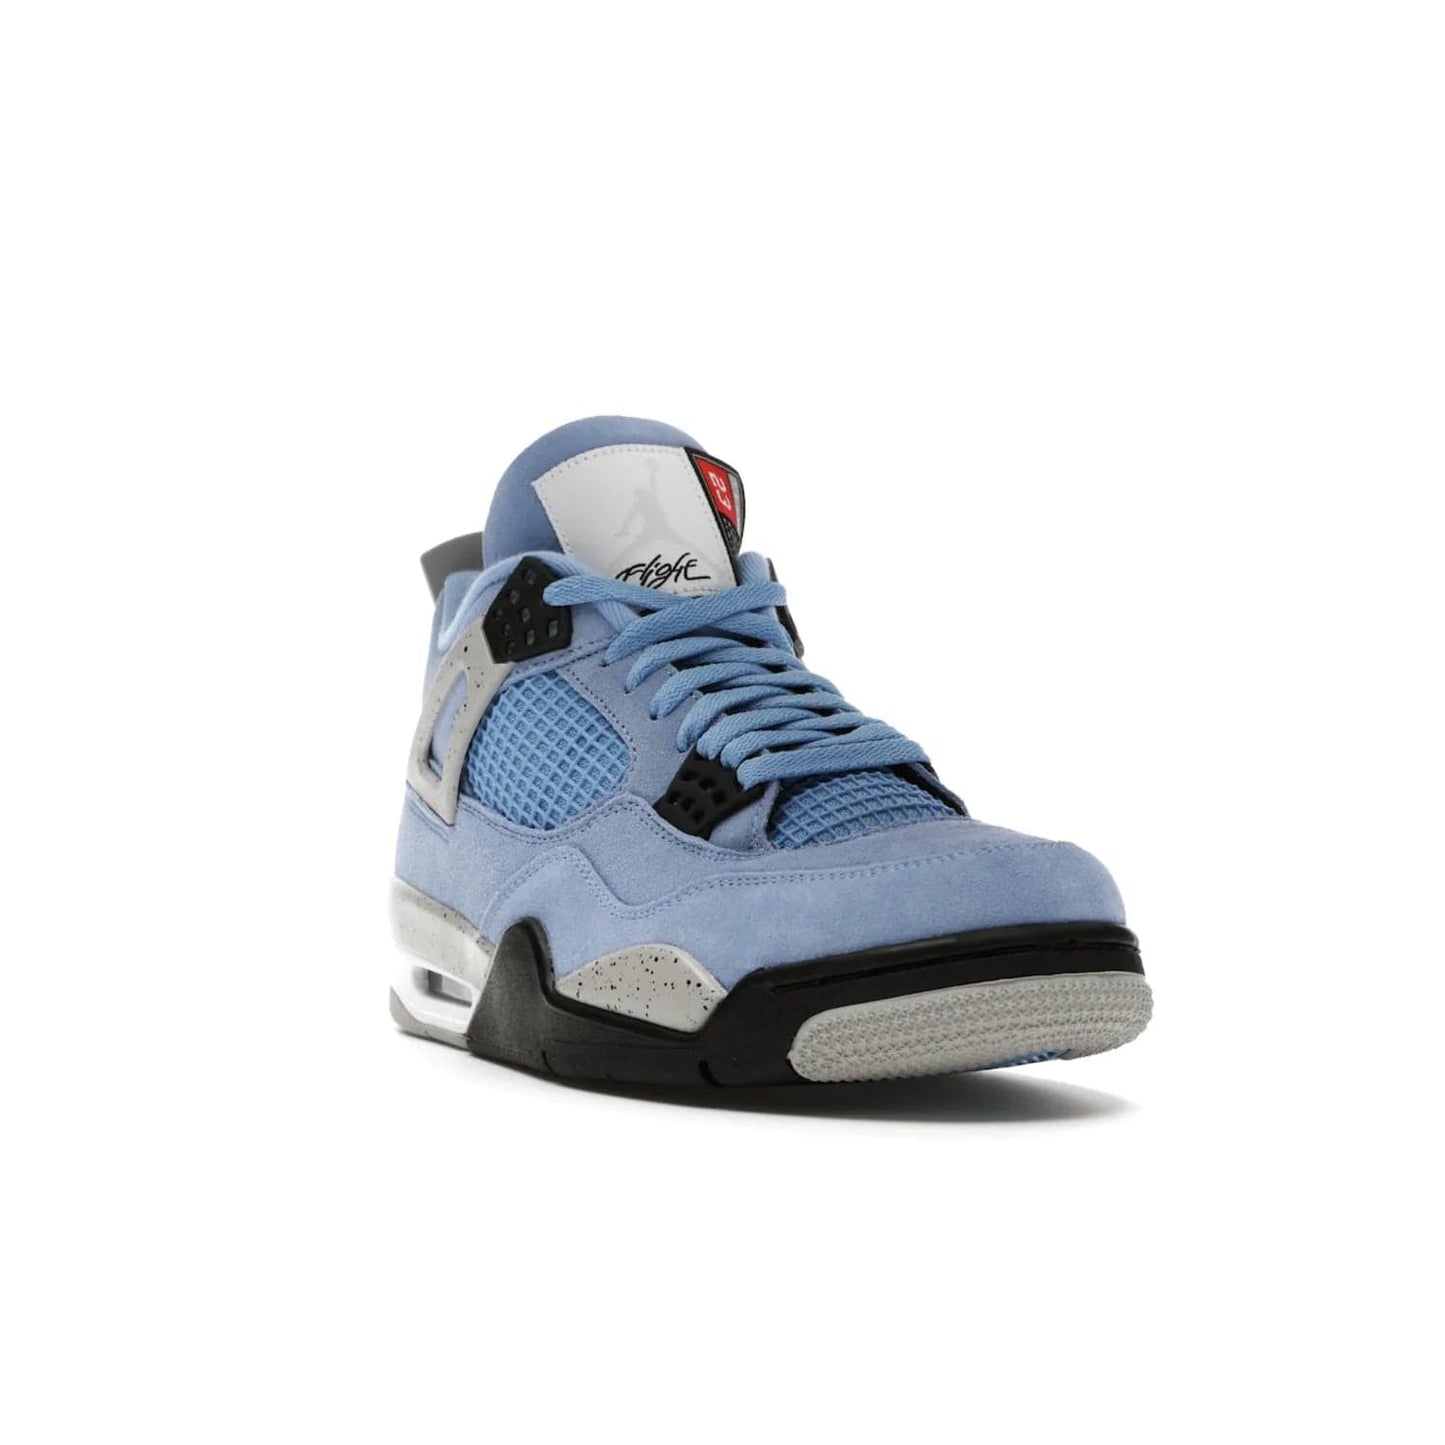 Jordan 4 Retro University Blue - Image 7 - Only at www.BallersClubKickz.com - The Air Jordan 4 University Blue honors MJ's alma mater. Rich University Blue suede, panels of netting, and Cement Grey speckled eyelets give this design an edgy look. Features a black, white and Tech Grey sole with a clear Air unit and two woven labels on the tongue. Jumpman logo & Team Jordan jock tag included. Released April 2021.